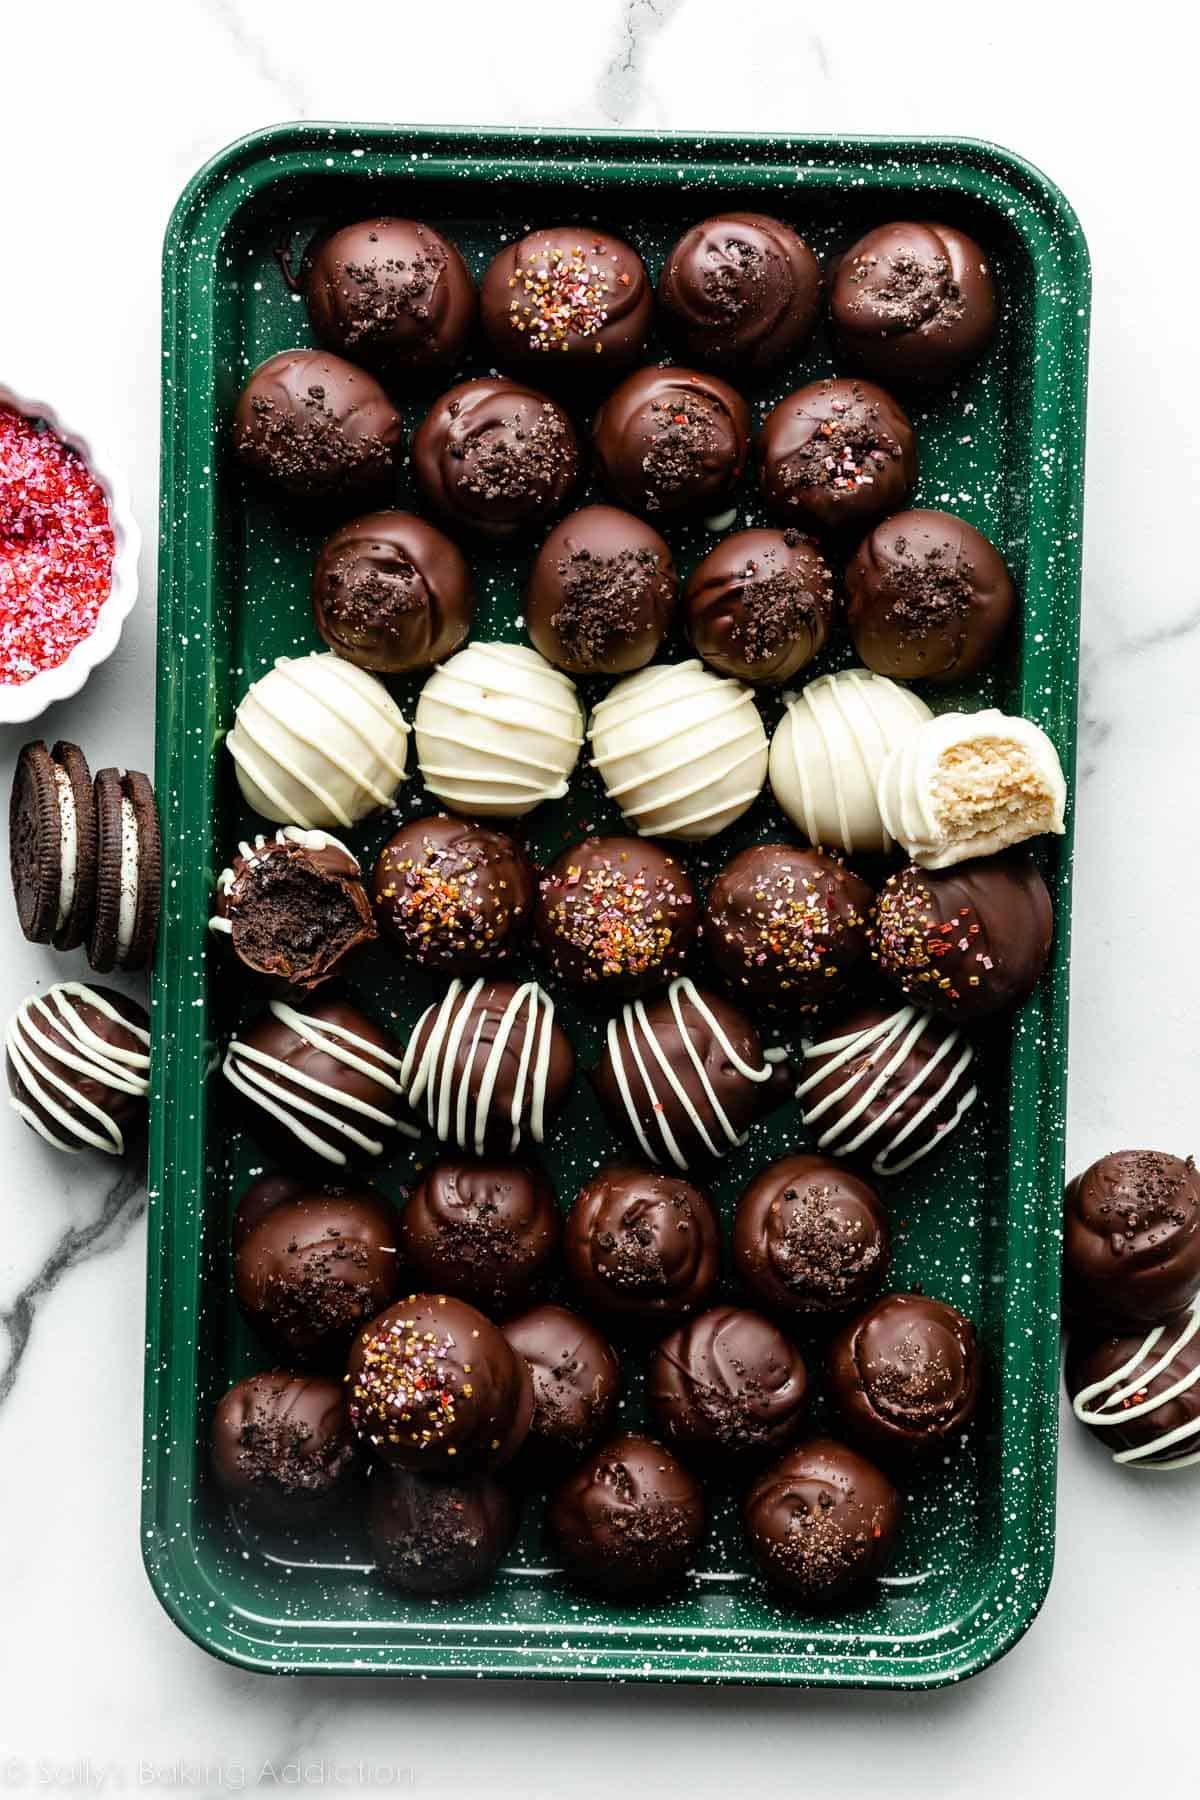 chocolate coated and white chocolate coated and drizzled oreo truffle balls on green baking sheet.